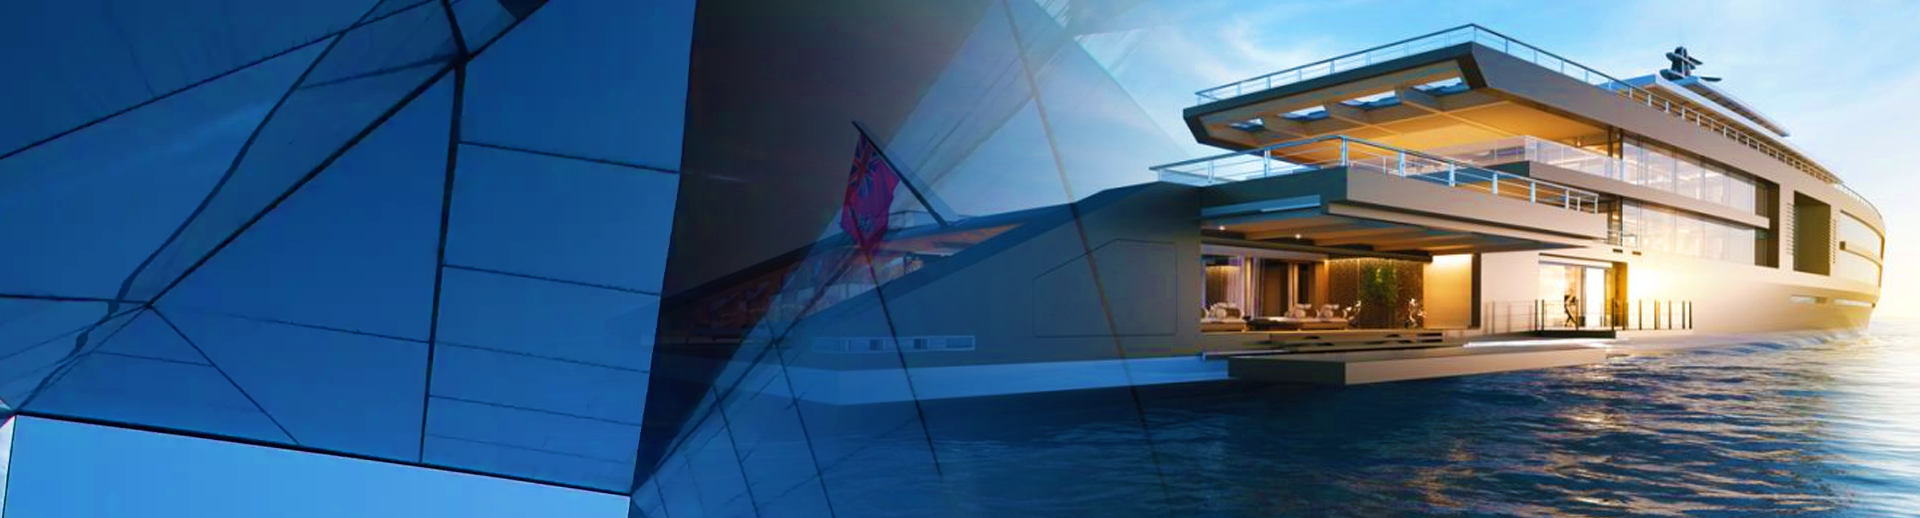 What the Yachting Community Has Been Missing: Technology